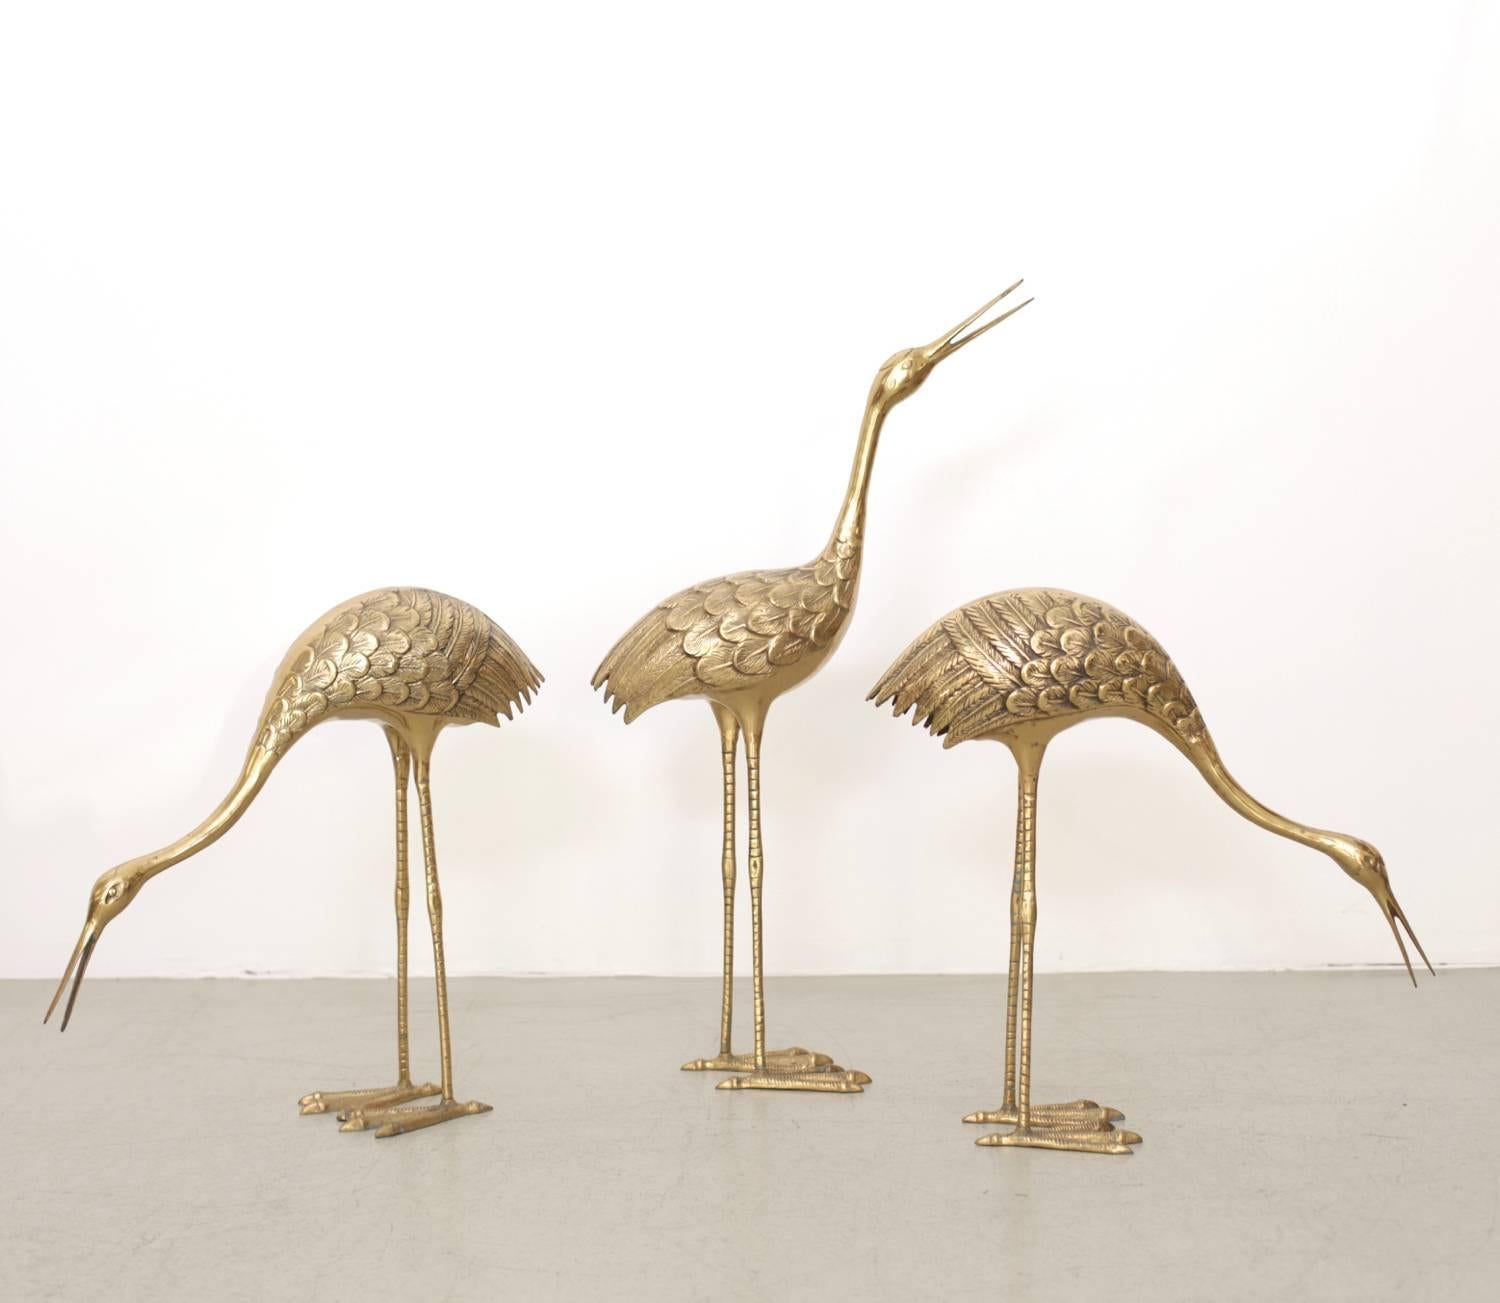 Extraordinary huge set of three flamingos or cranes made of brass. They are in very good condition and they bring the Hollywood Regency glamour in every room.

